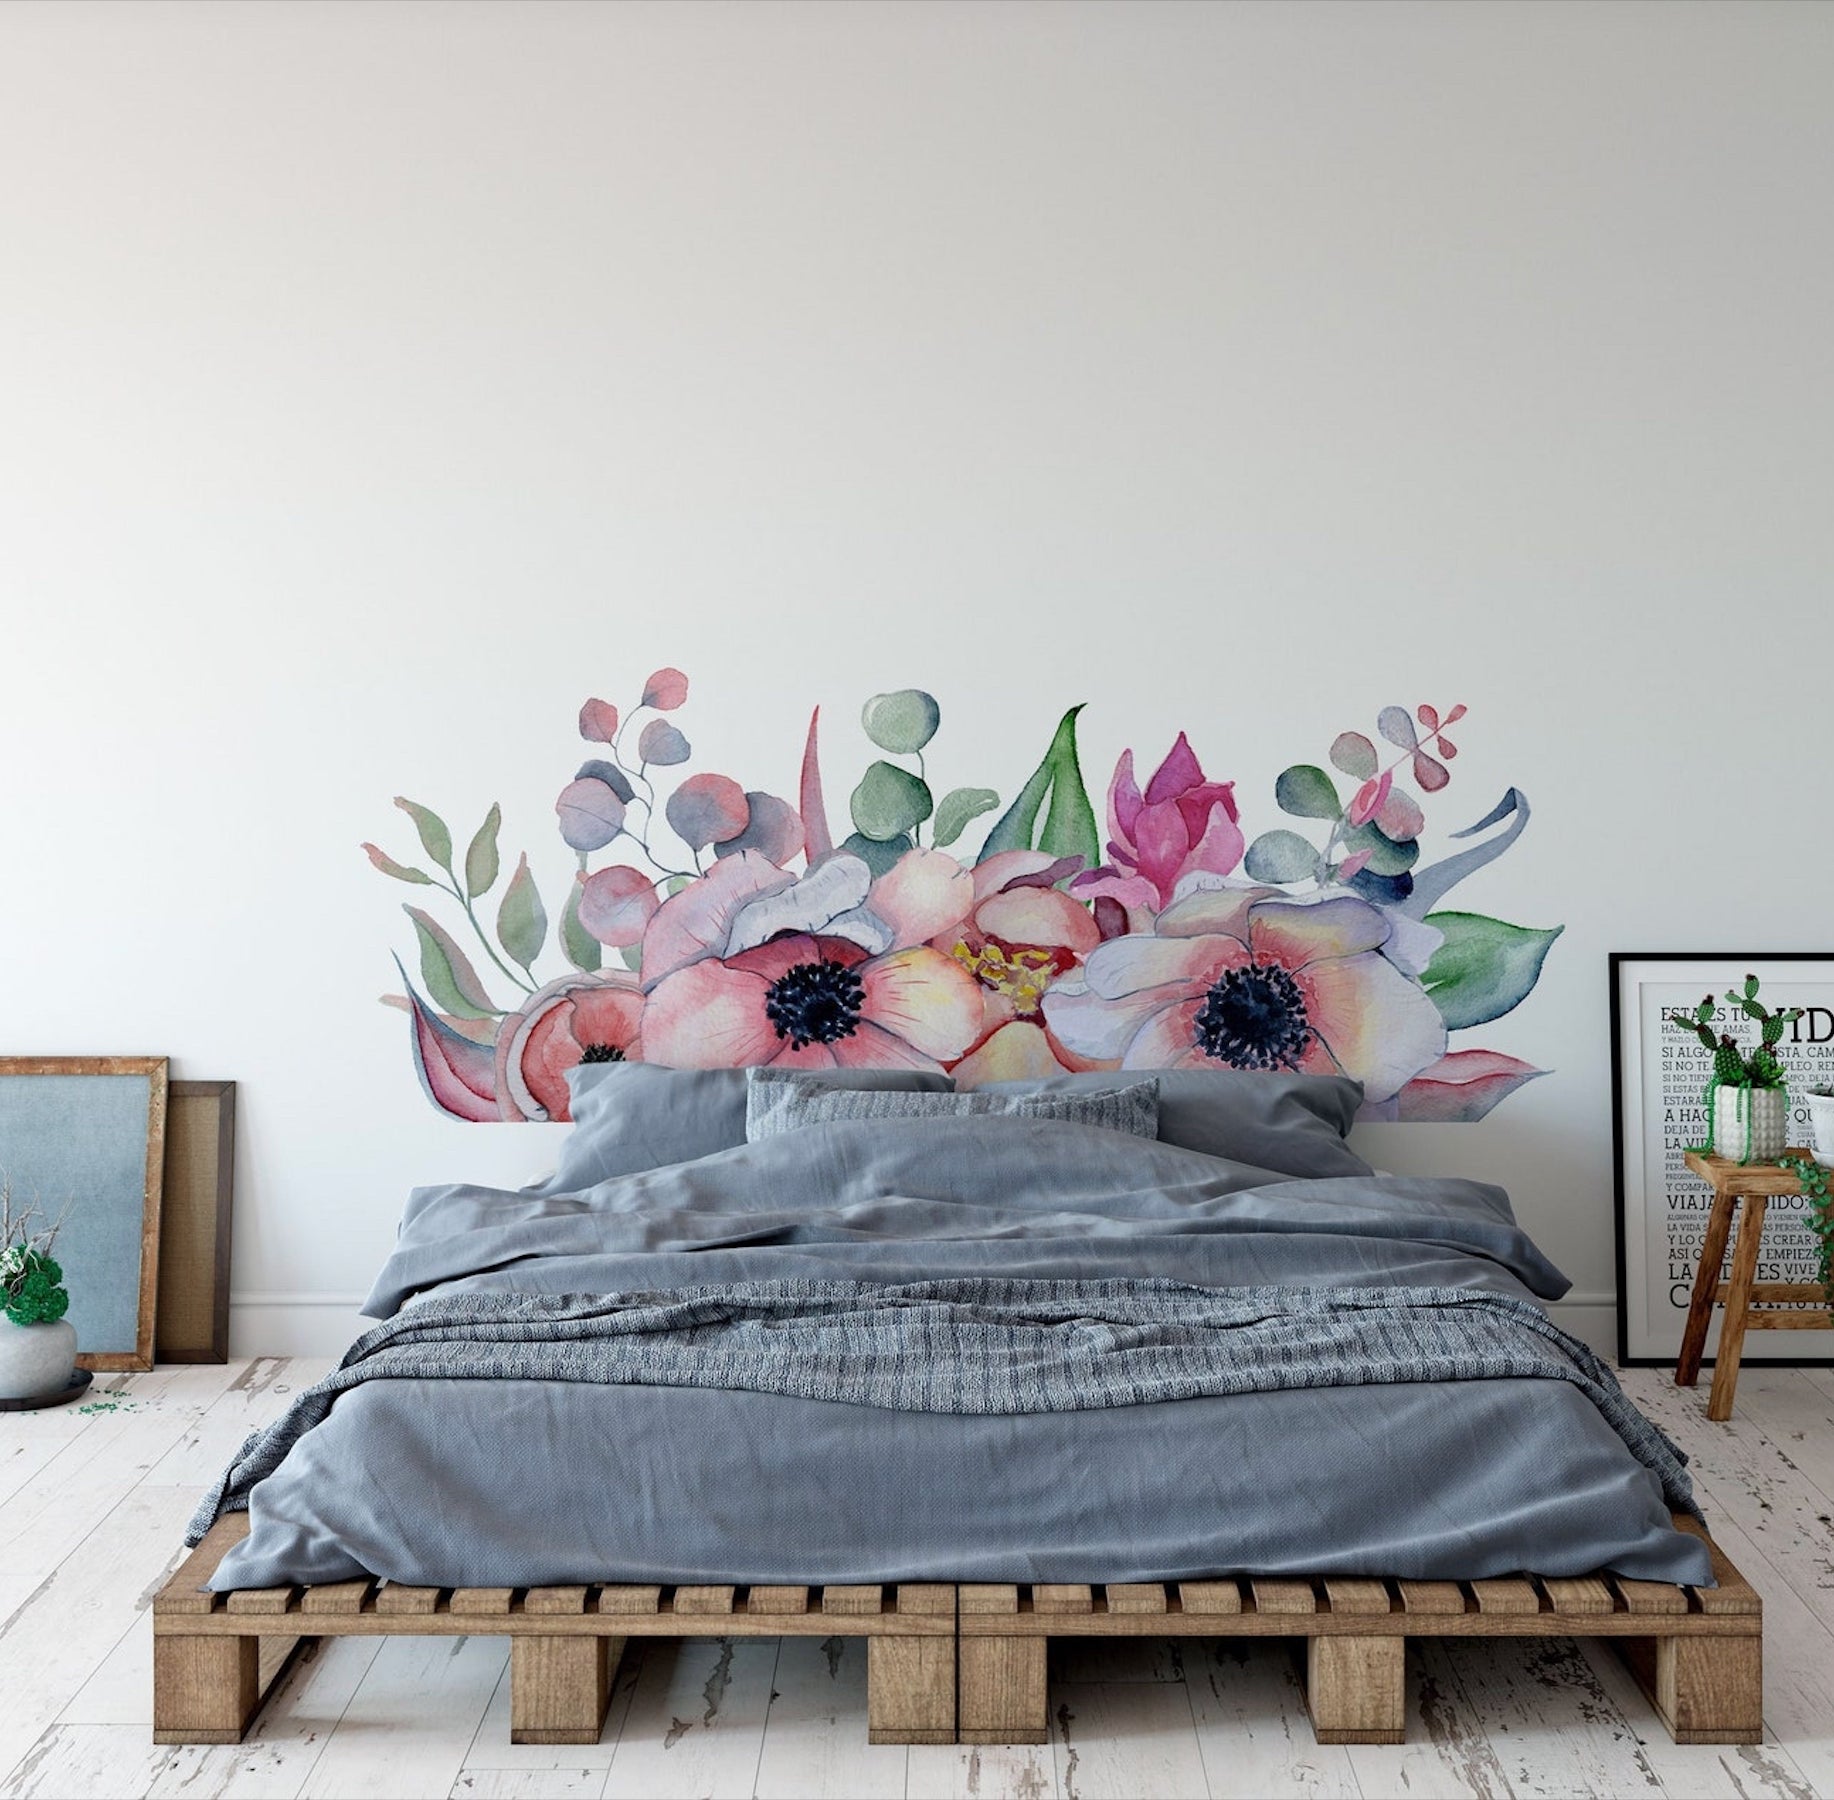 A decale with giant pansies serves as a headboard for a bed that looks as if it is sitting on palettes. The bed has gray bedding. A stool serves as an end table.